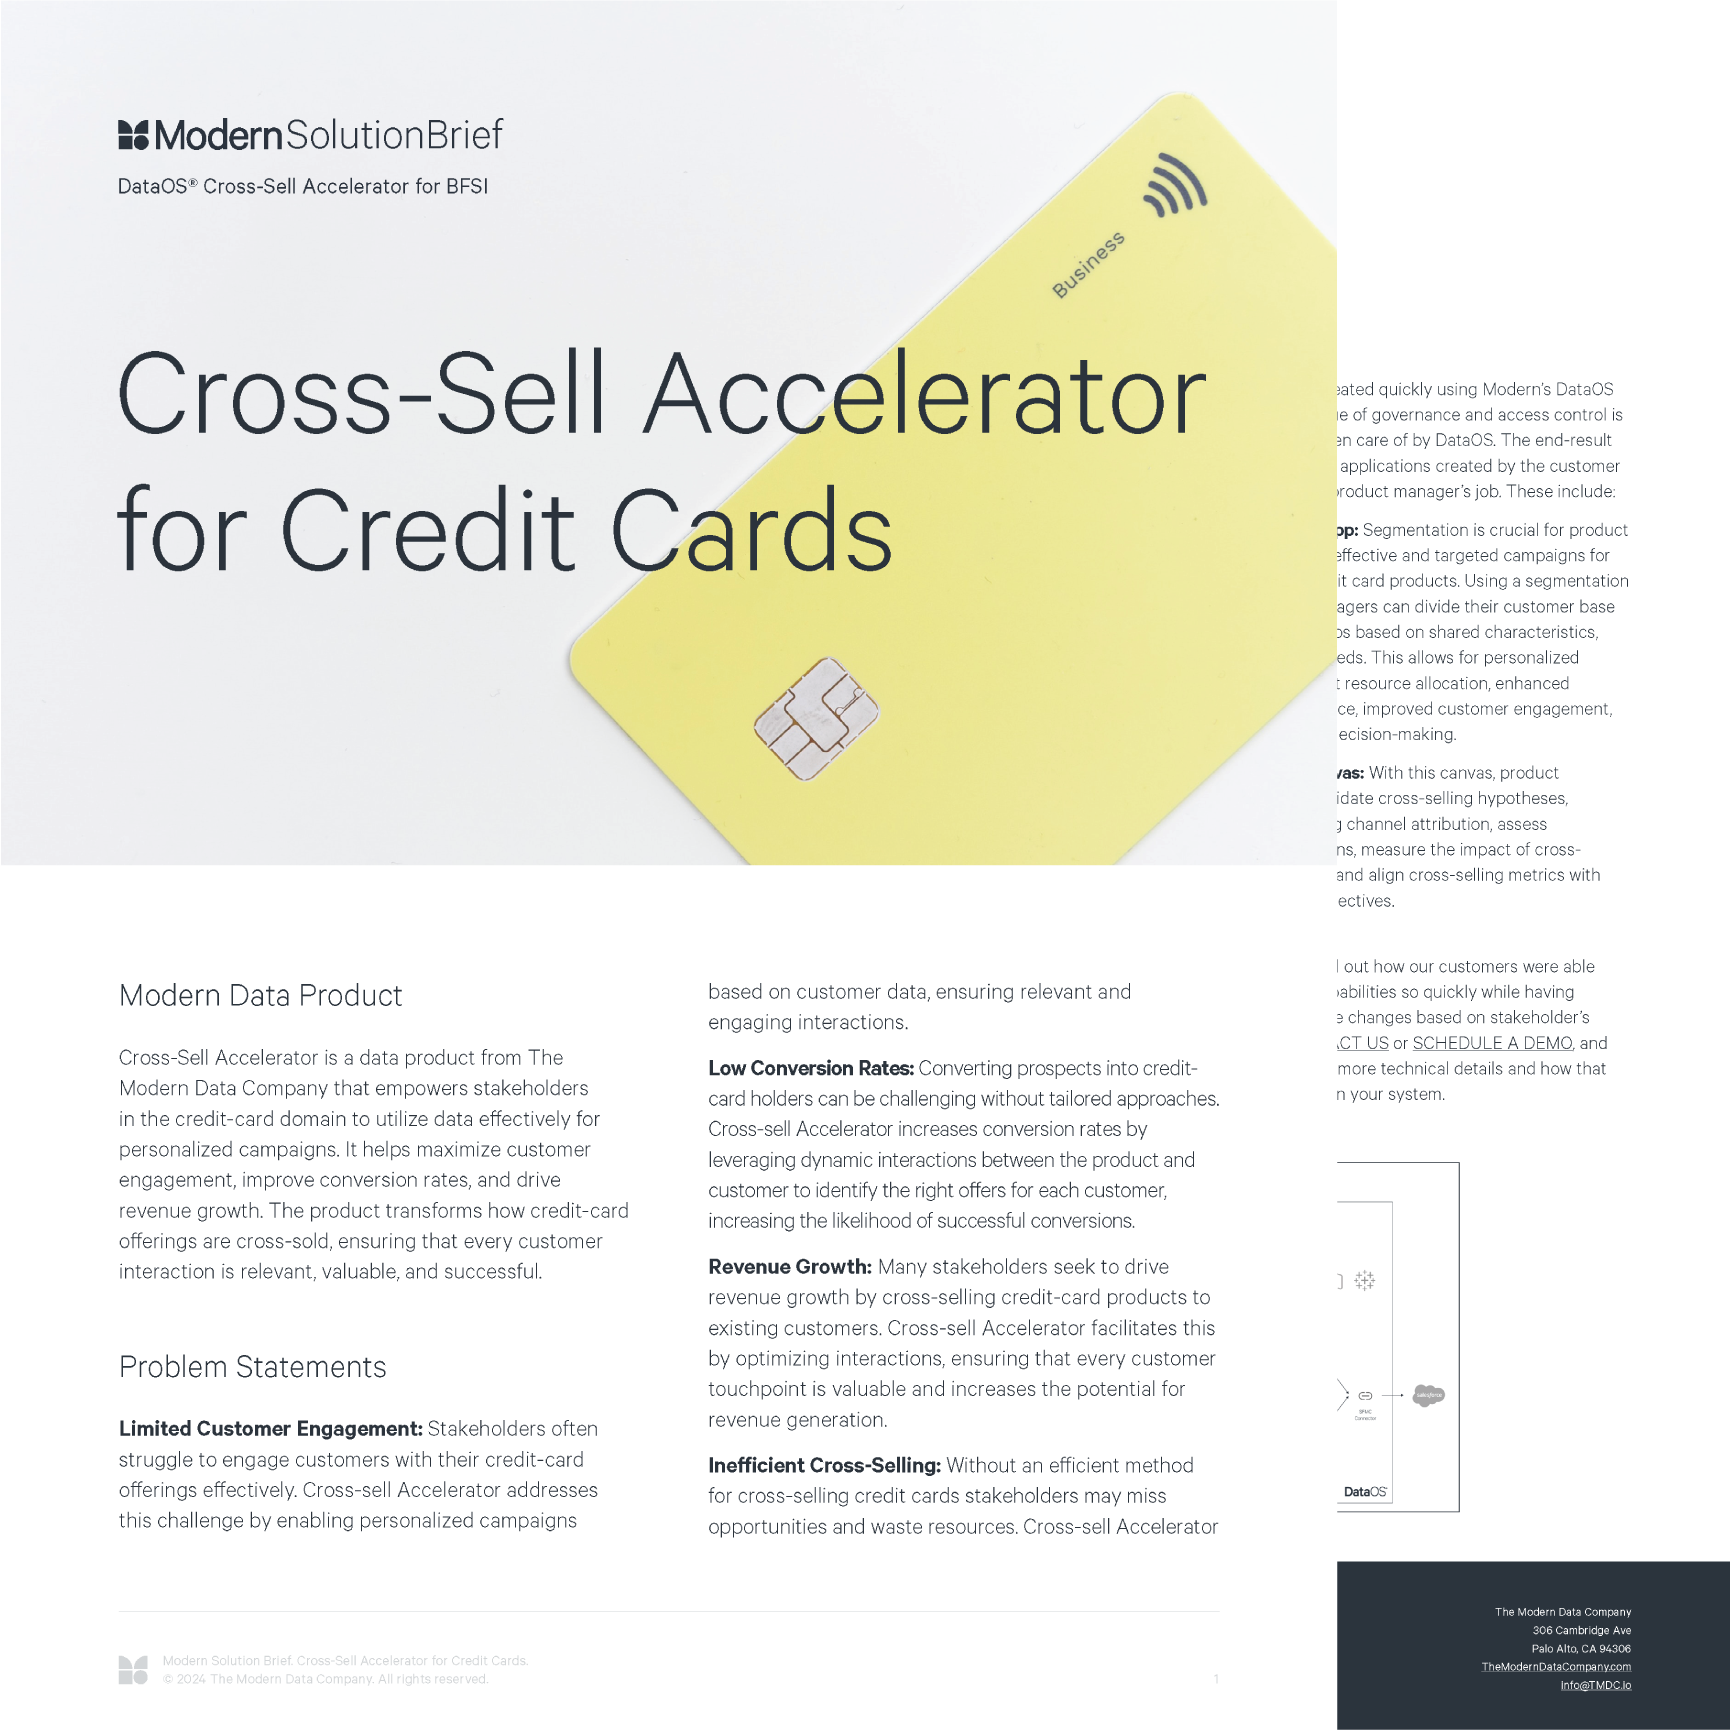 Cross-Sell Accelerator for Credit Cards